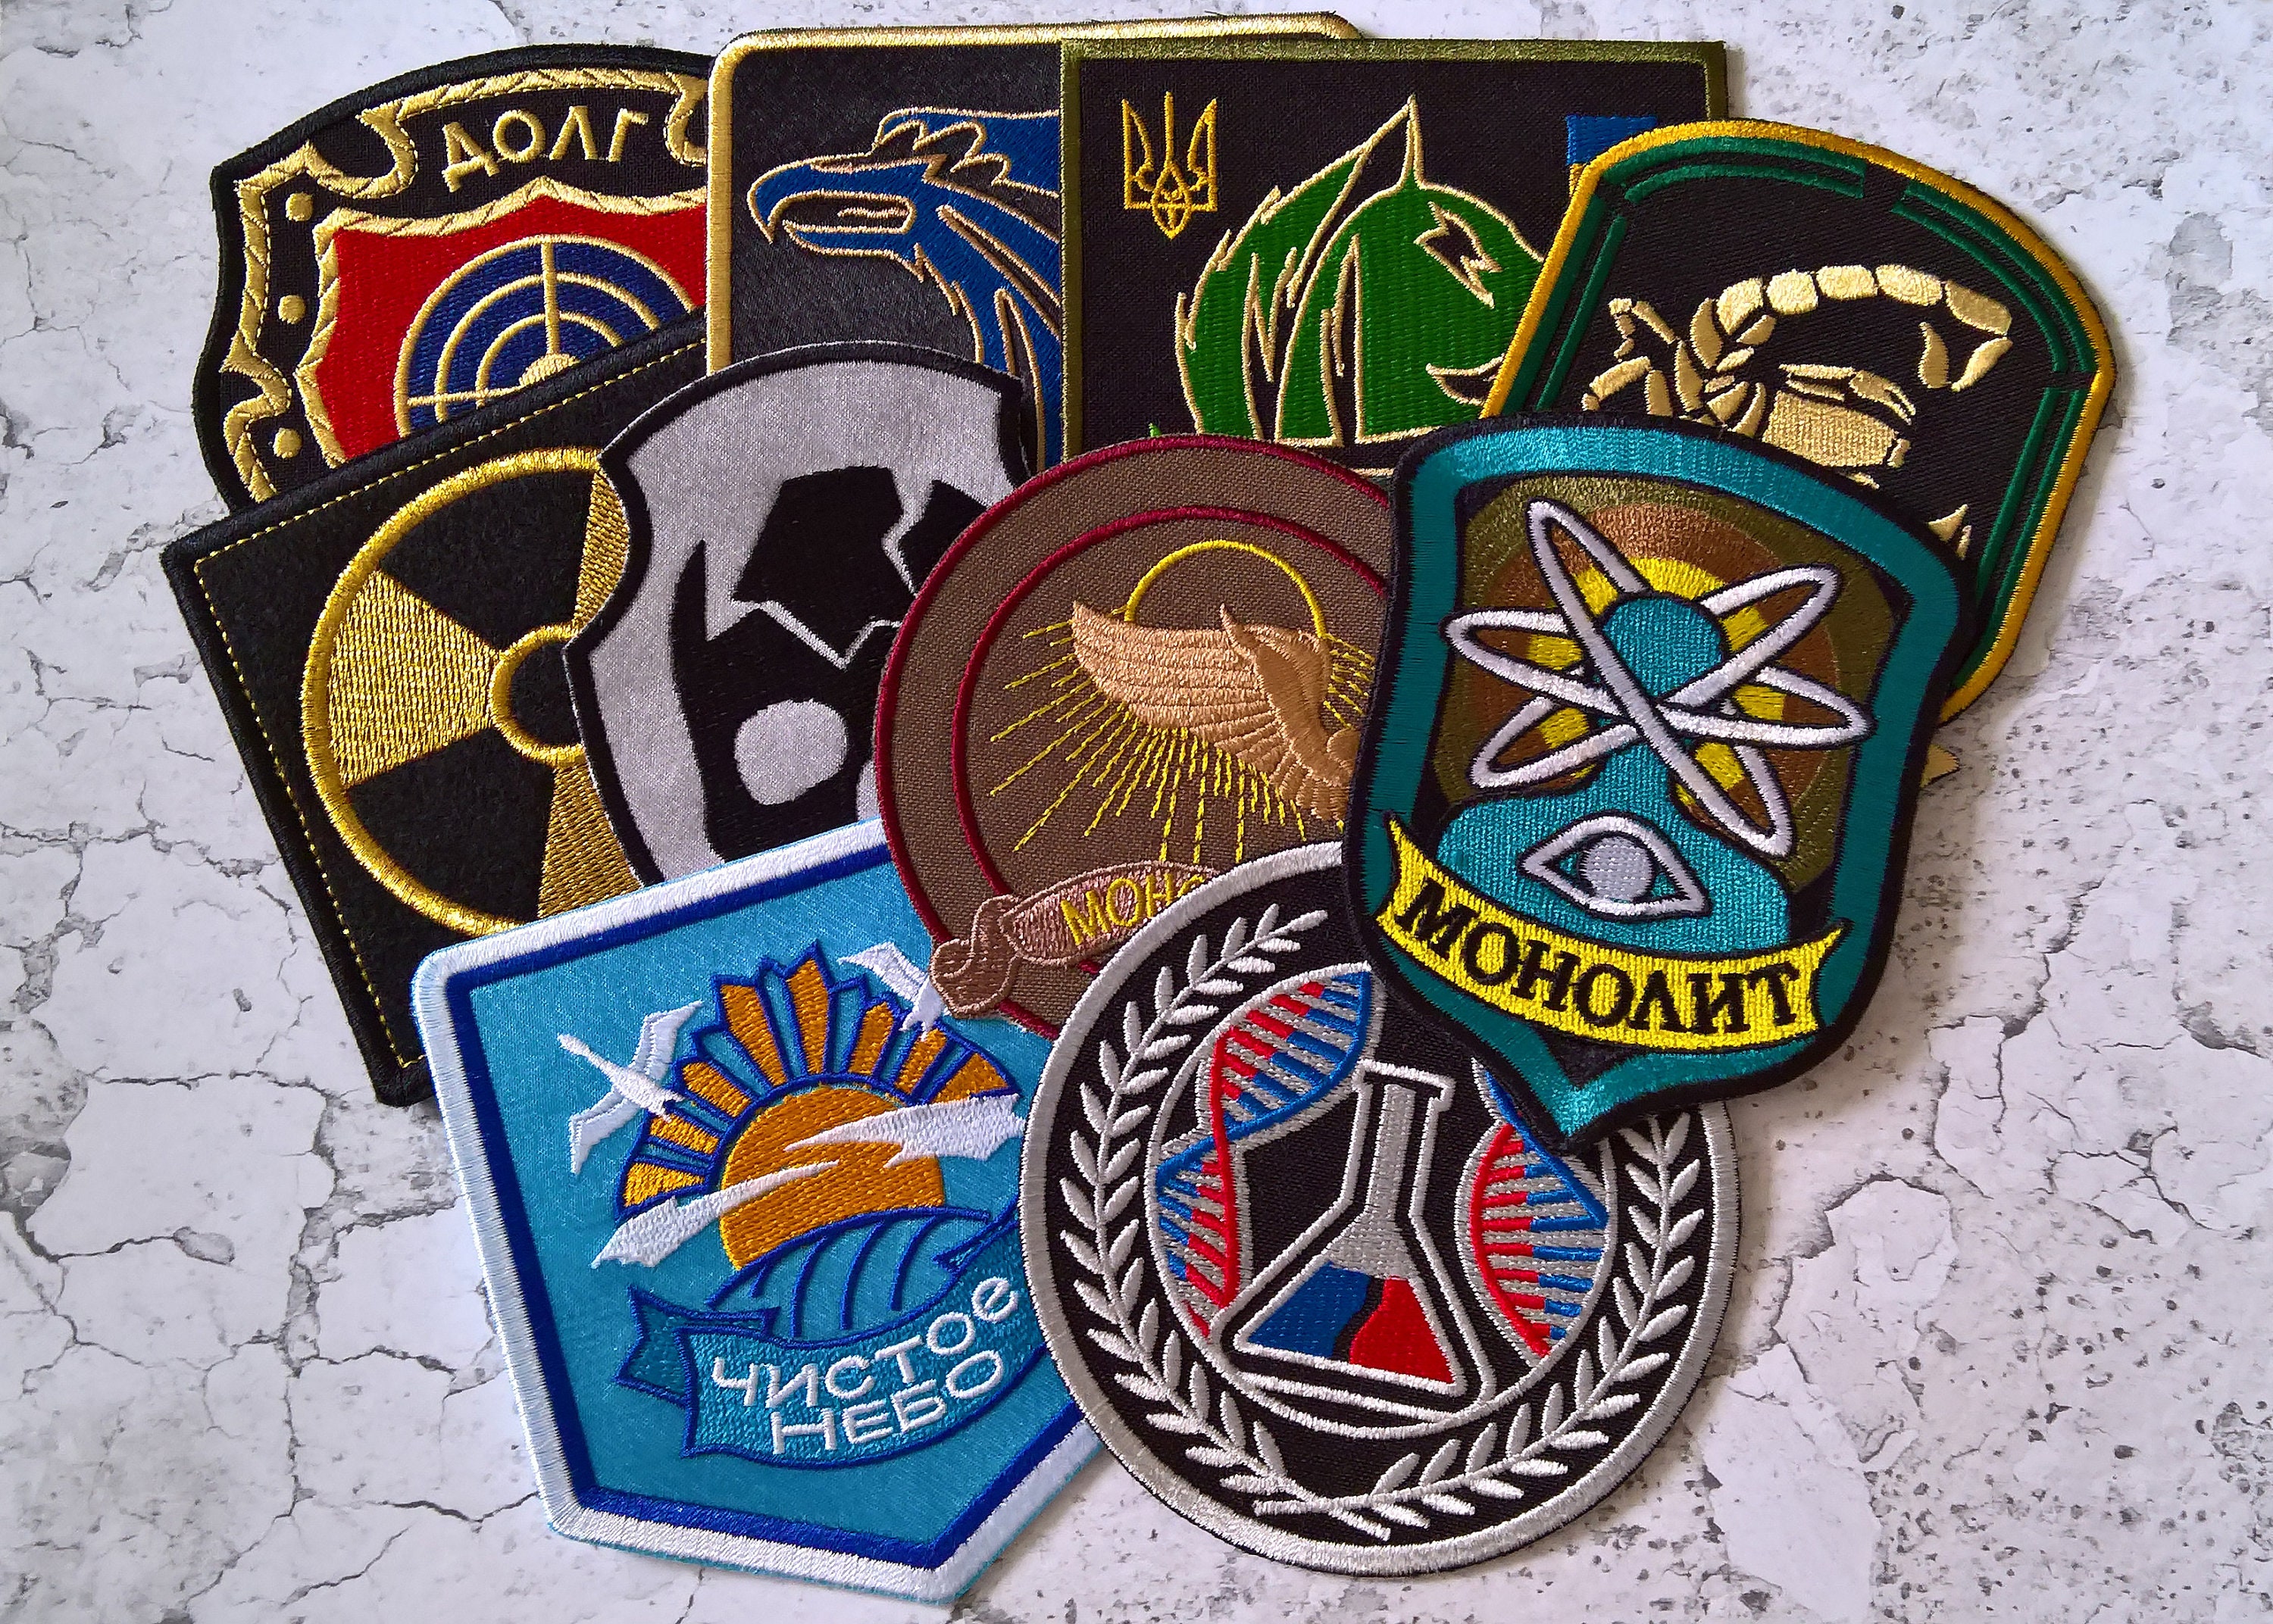 Collection patch. Патч сталкер. Патчи из сталкер. Патч Stalker радиация. Все патчи из сталкера.